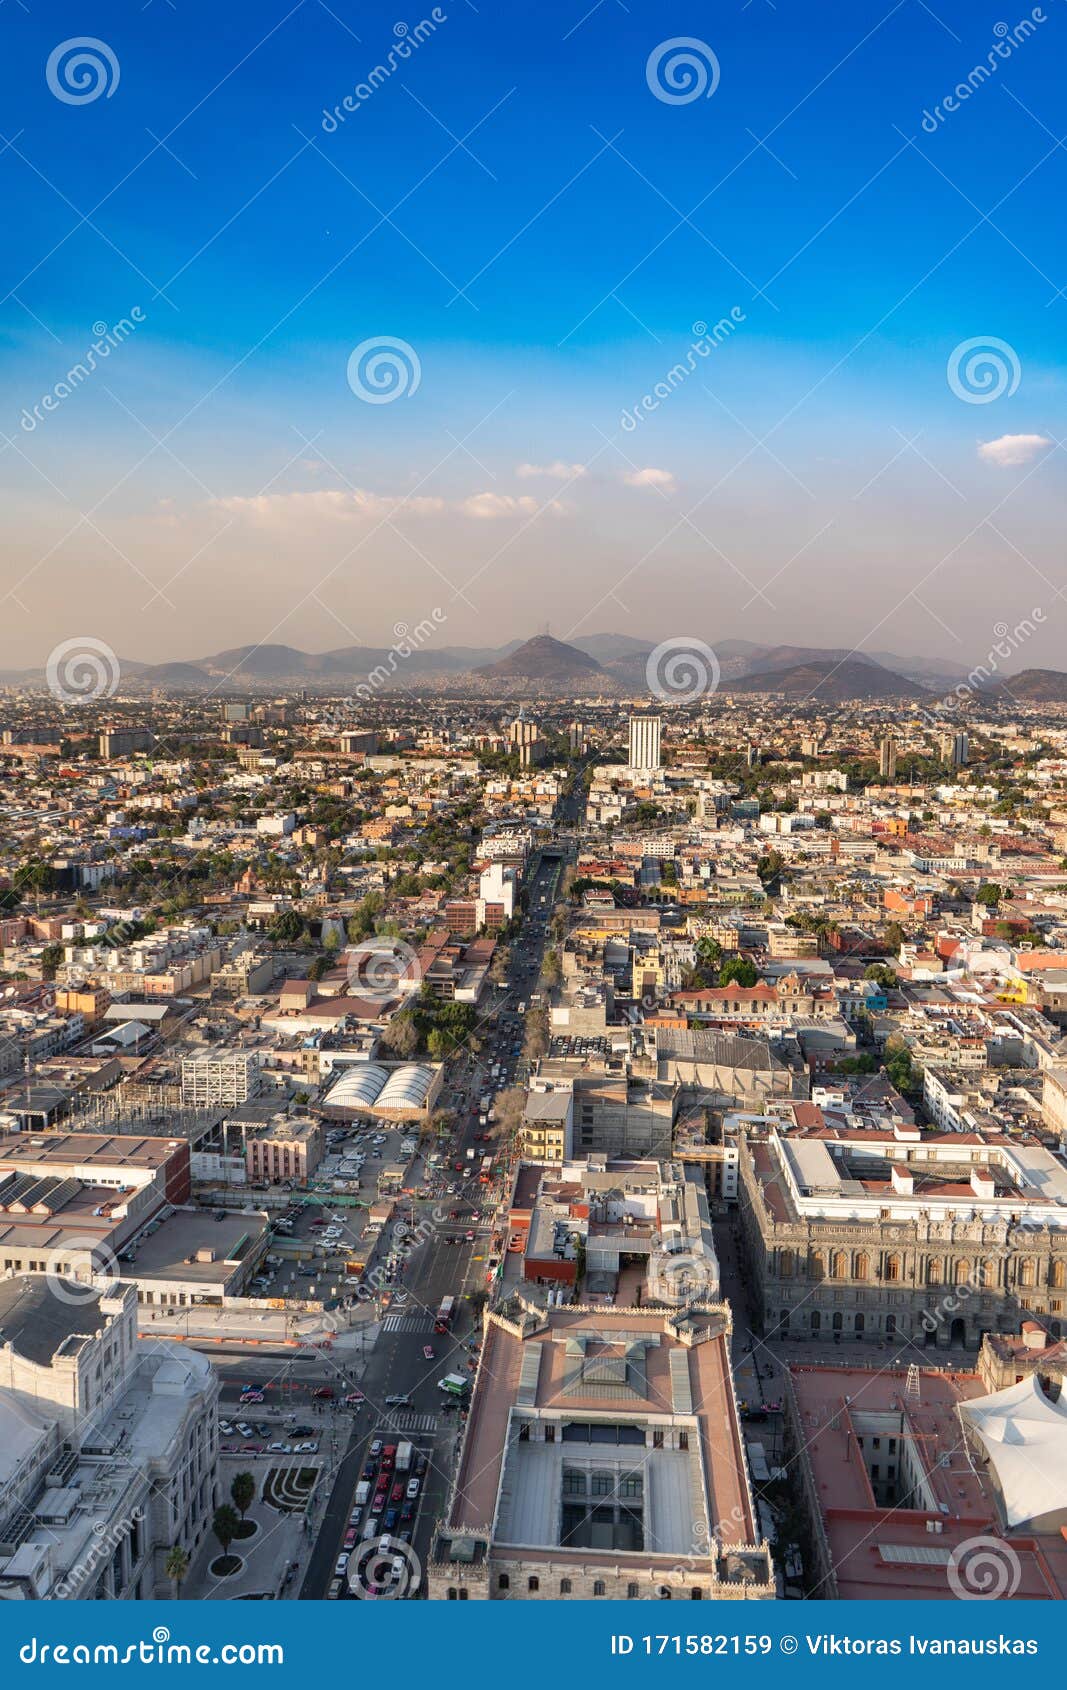 panorama of mexico city central part from skyscraper latino americano. view with buildings. travel photo, background,